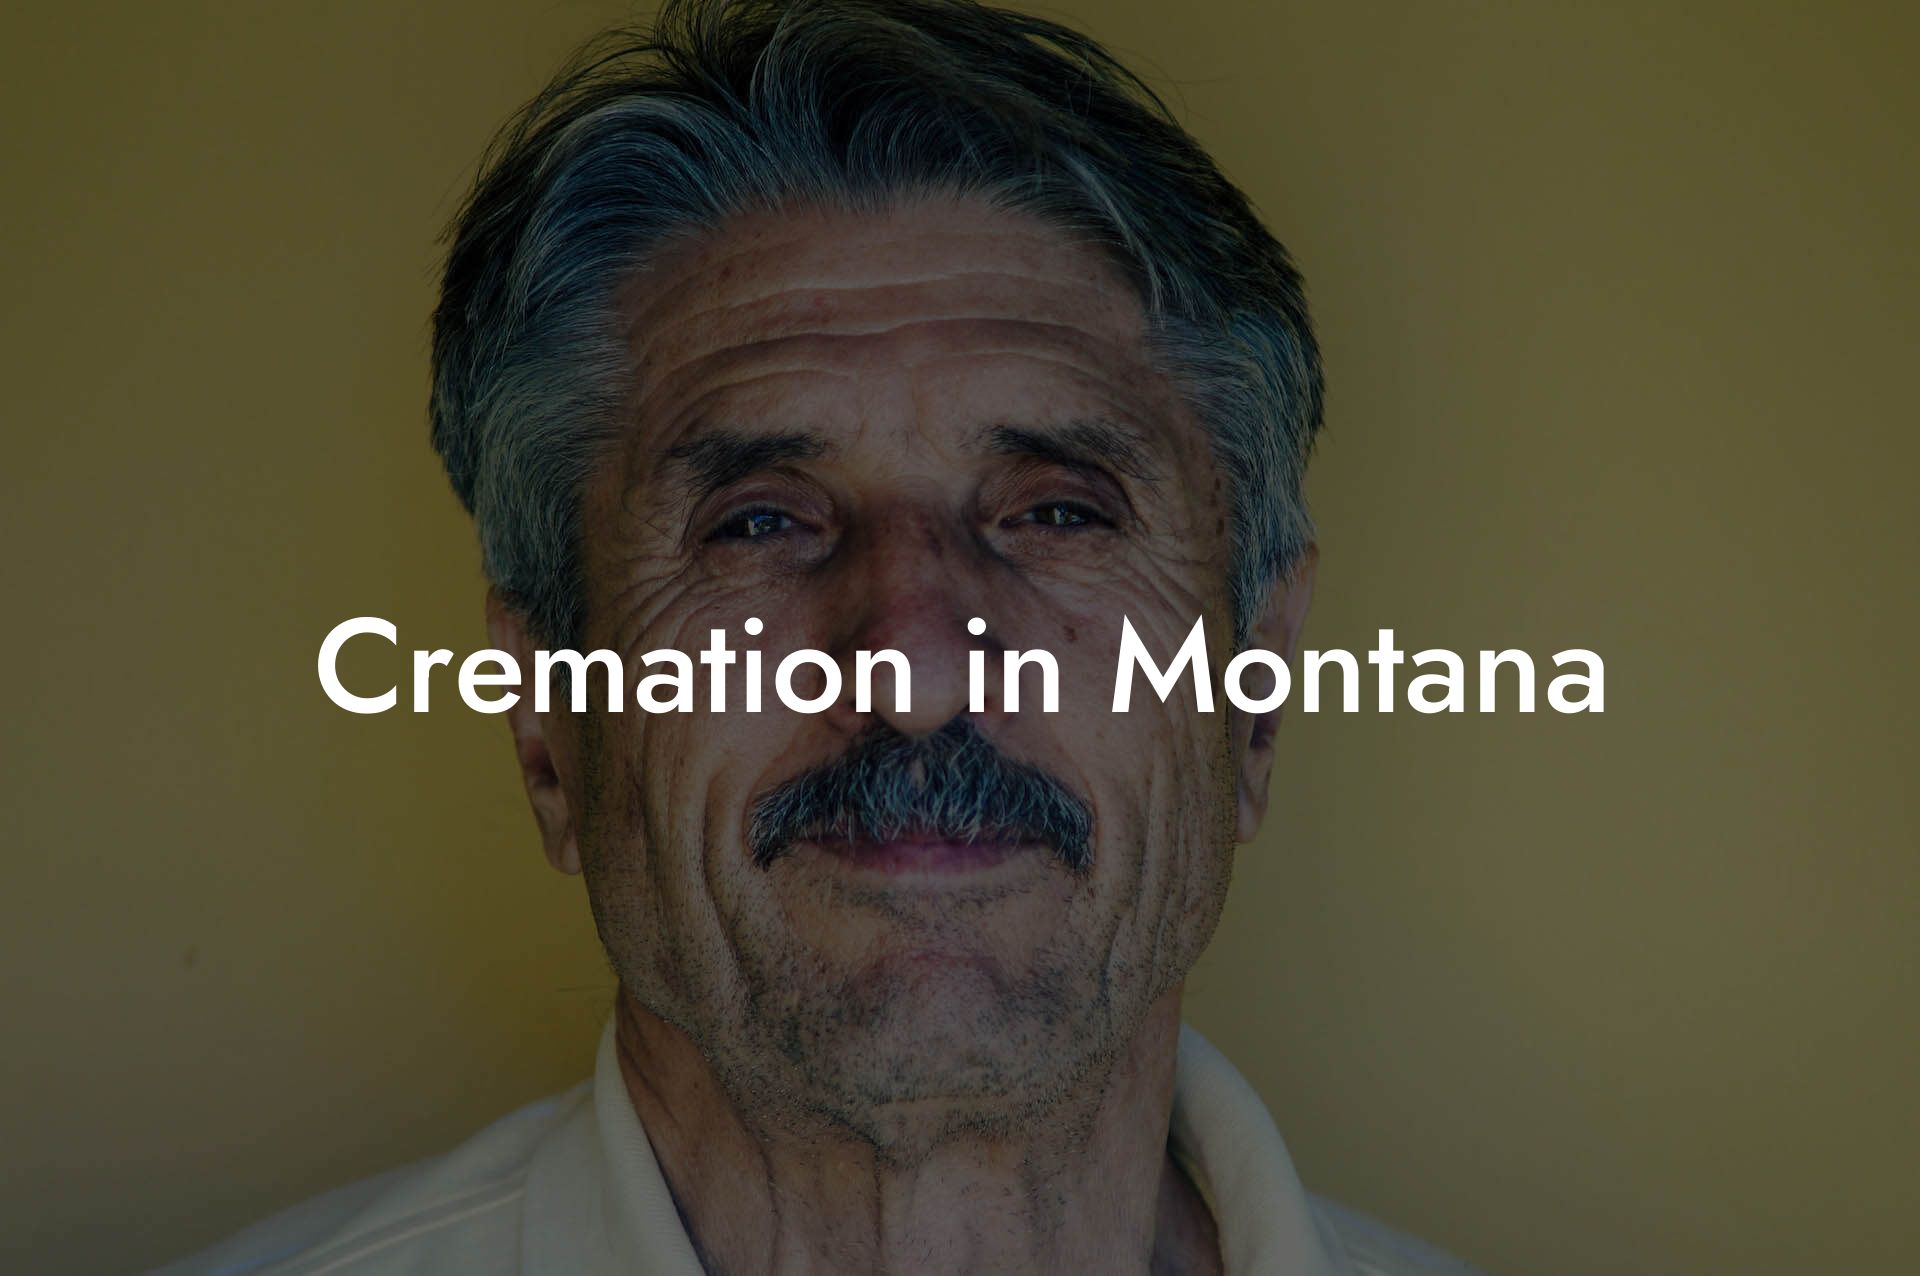 Cremation in Montana